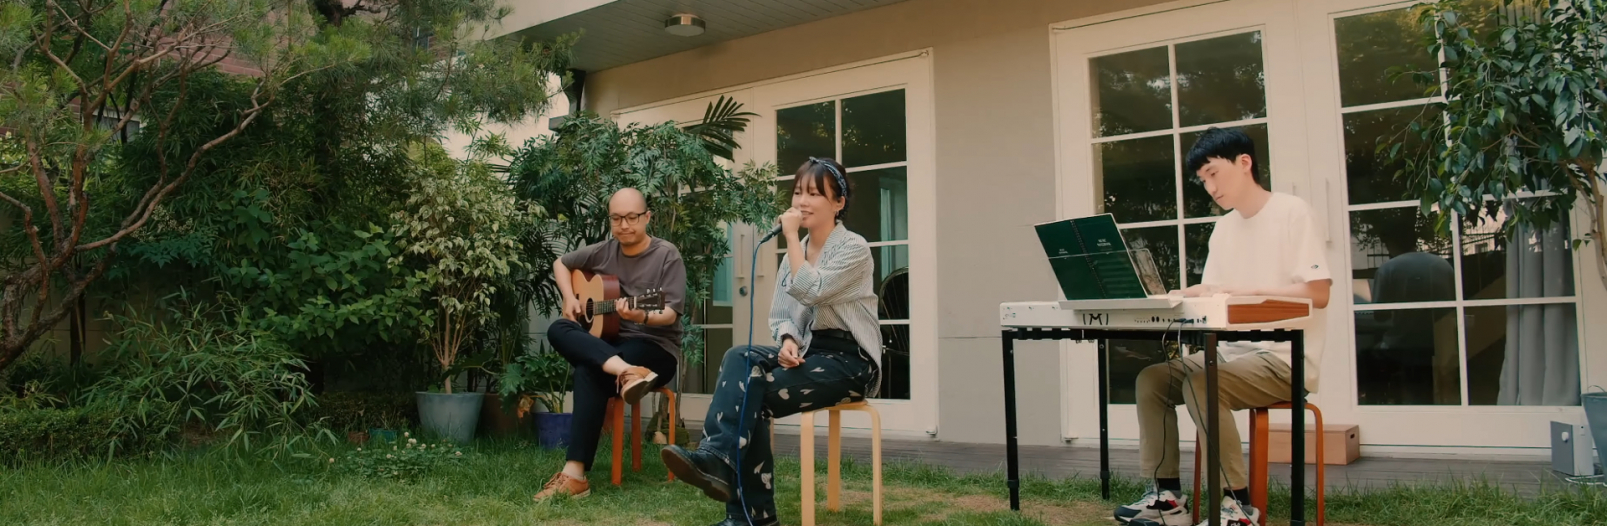 DONNA and 2 Korean men are sitting in a yard behind a building. Donna is singing in to a microphone. The man to her right is playing guitar and the one to her left playing the keyboard.